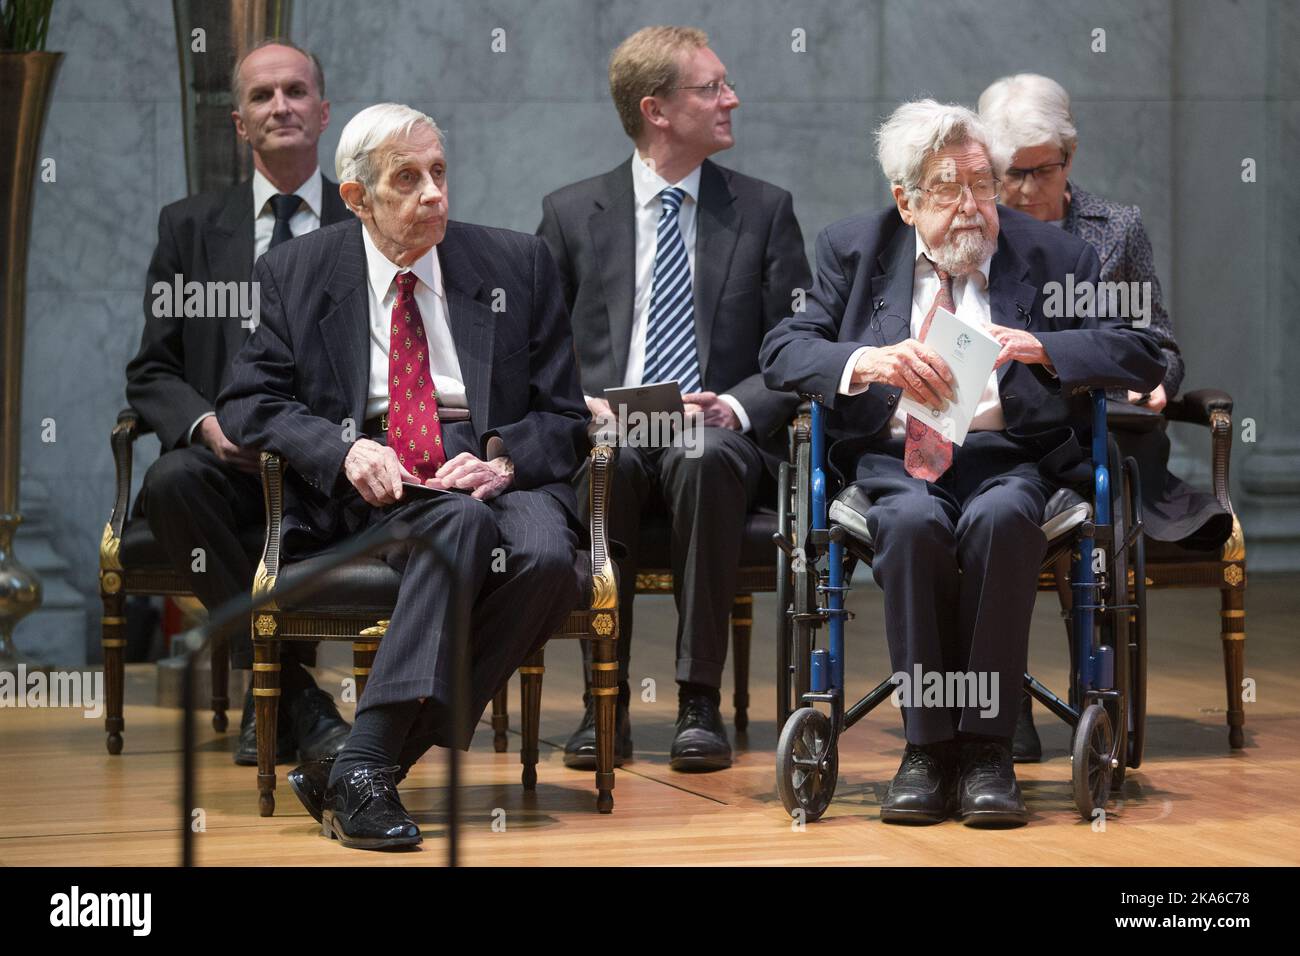 Mathematicians John F. Nash Jr  (left) and Louis Nirenberg before receiving the Abel Prize 2015 at a ceremony in University of Oslo   Stock Photo